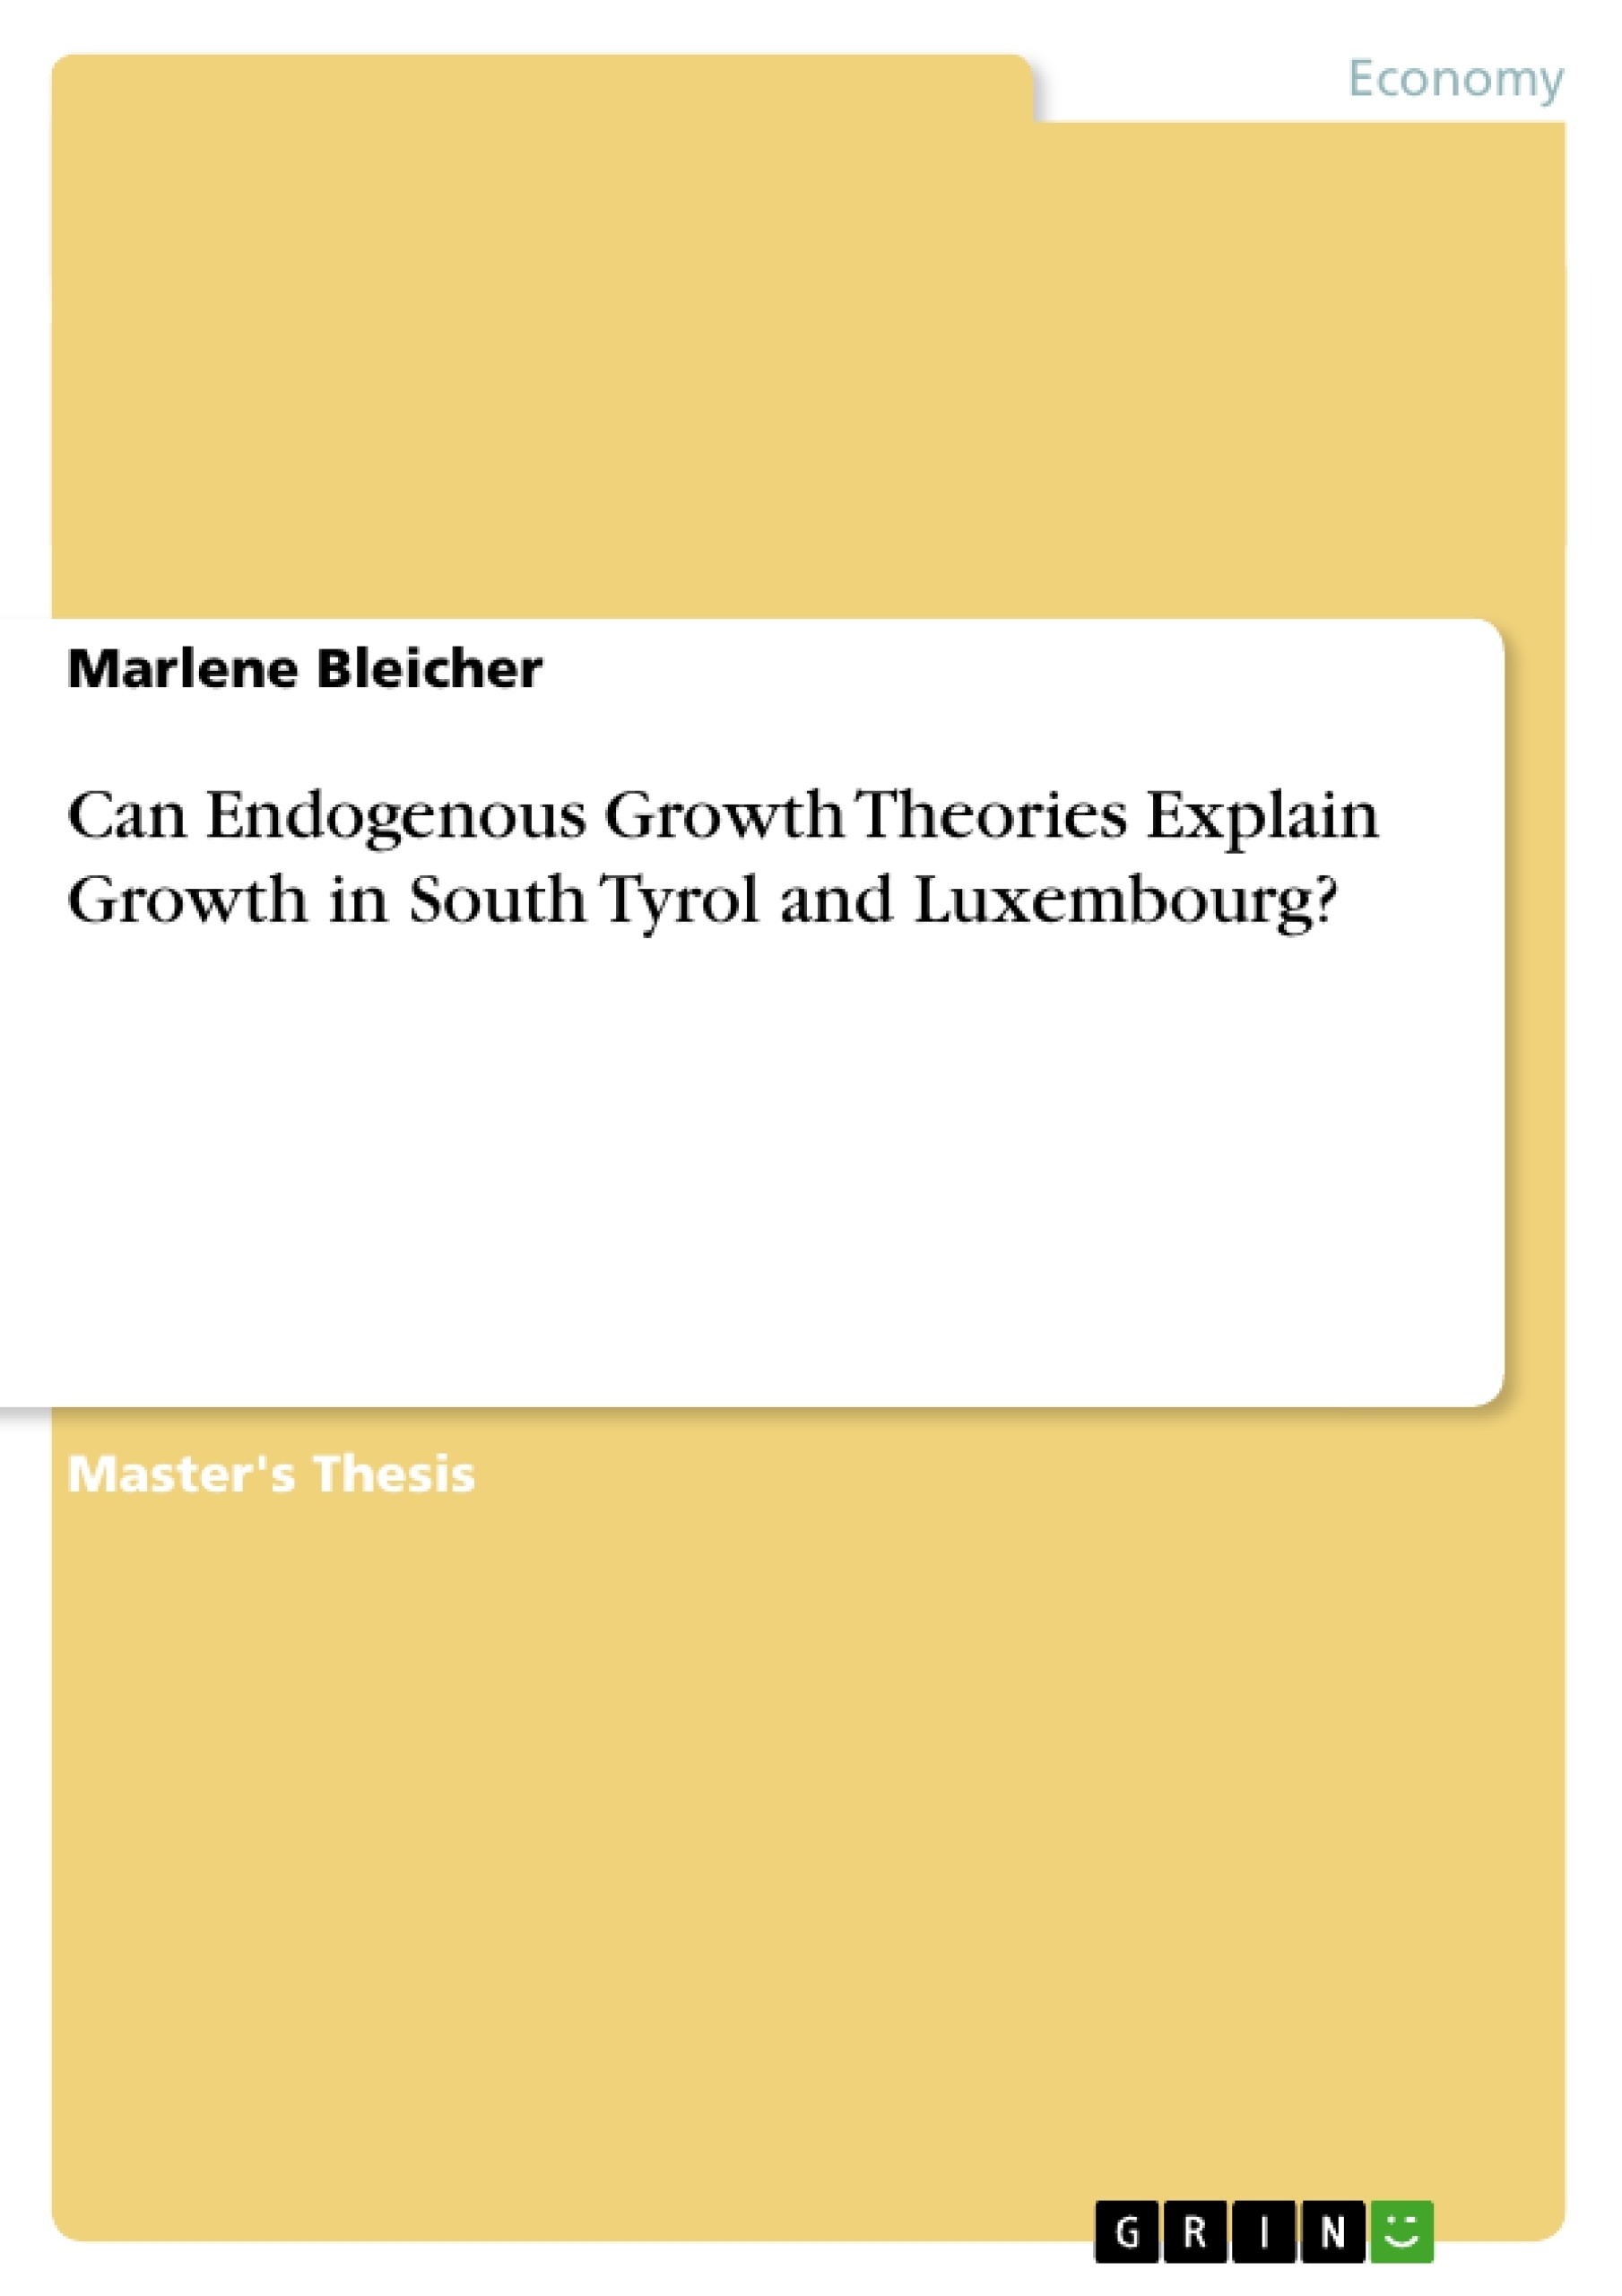 Title: Can Endogenous Growth Theories Explain Growth in South Tyrol and Luxembourg?